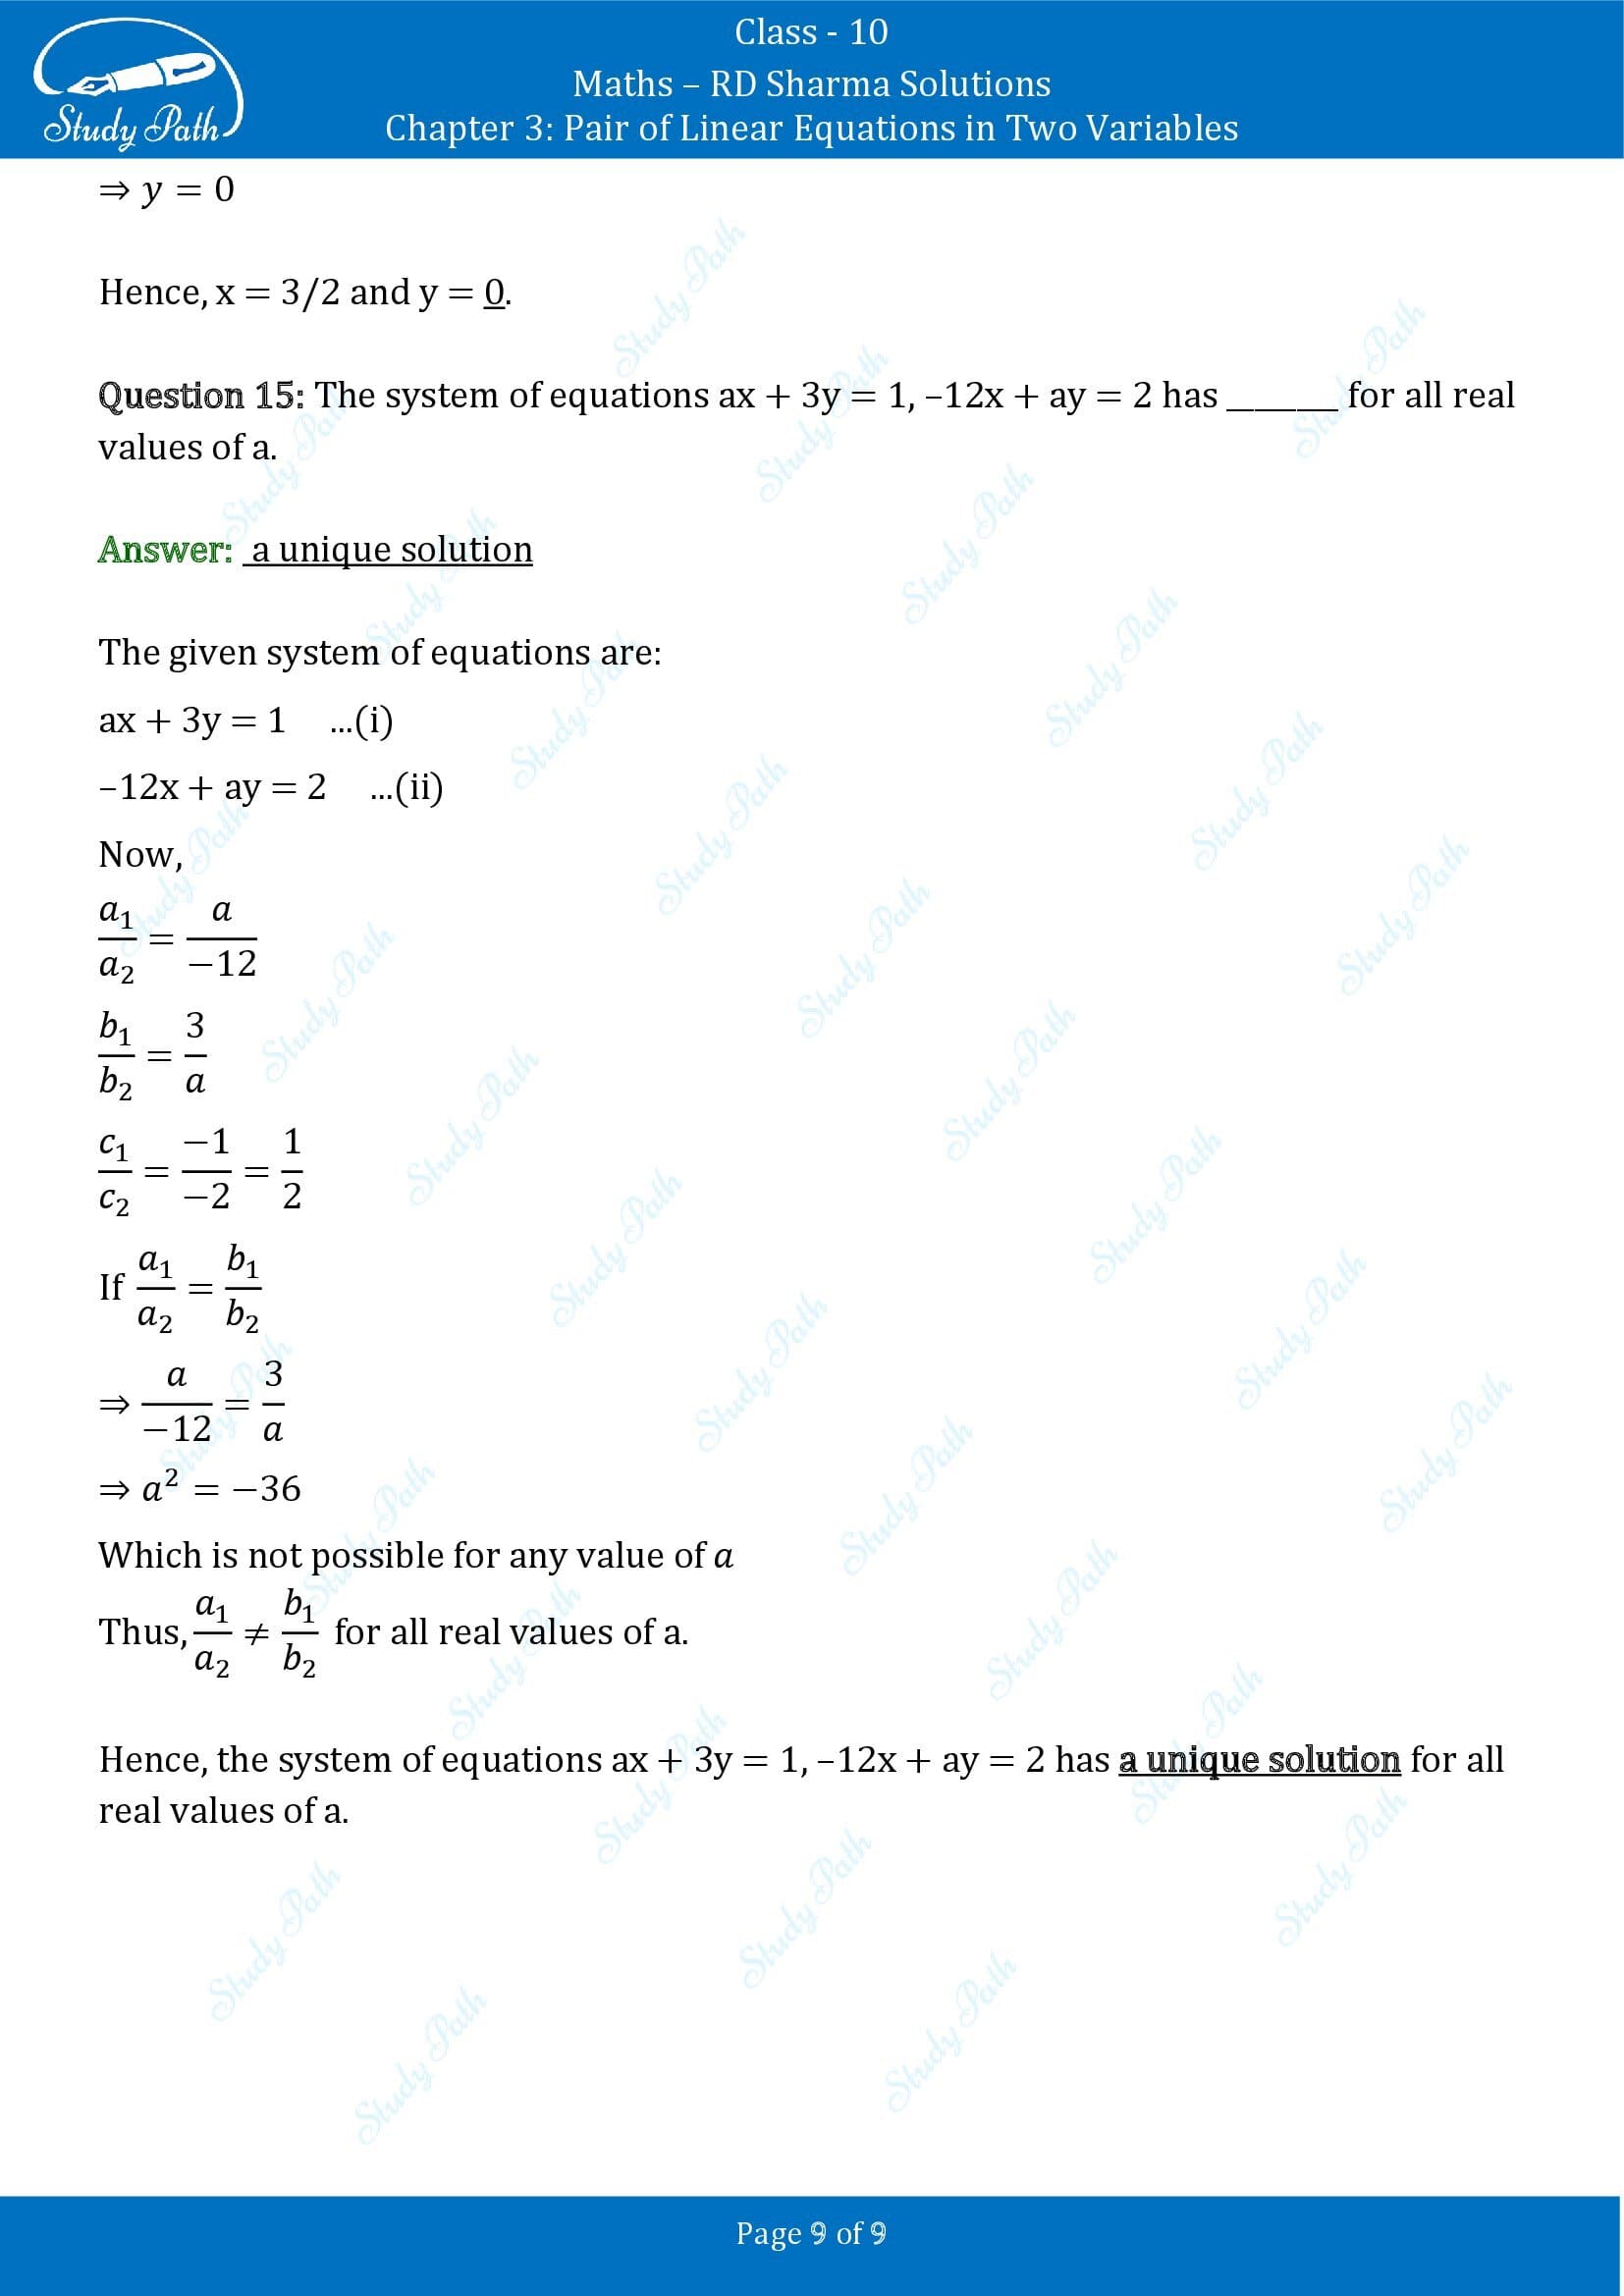 RD Sharma Solutions Class 10 Chapter 3 Pair of Linear Equations in Two Variables Exercise Fill in the Blank Type Questions FBQs 00009